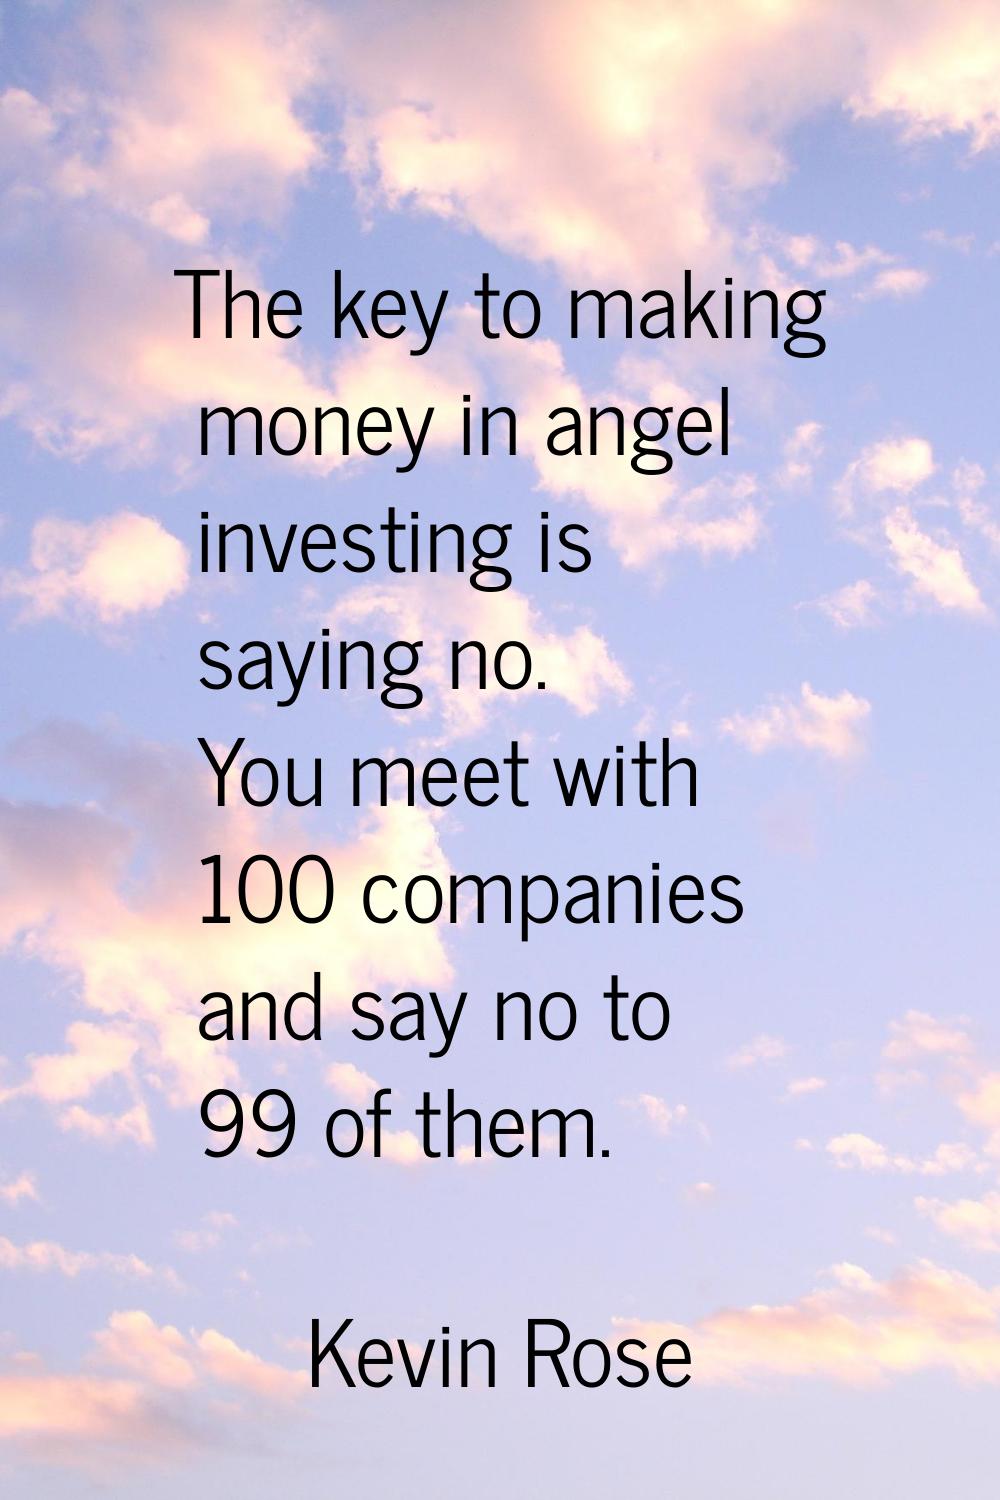 The key to making money in angel investing is saying no. You meet with 100 companies and say no to 